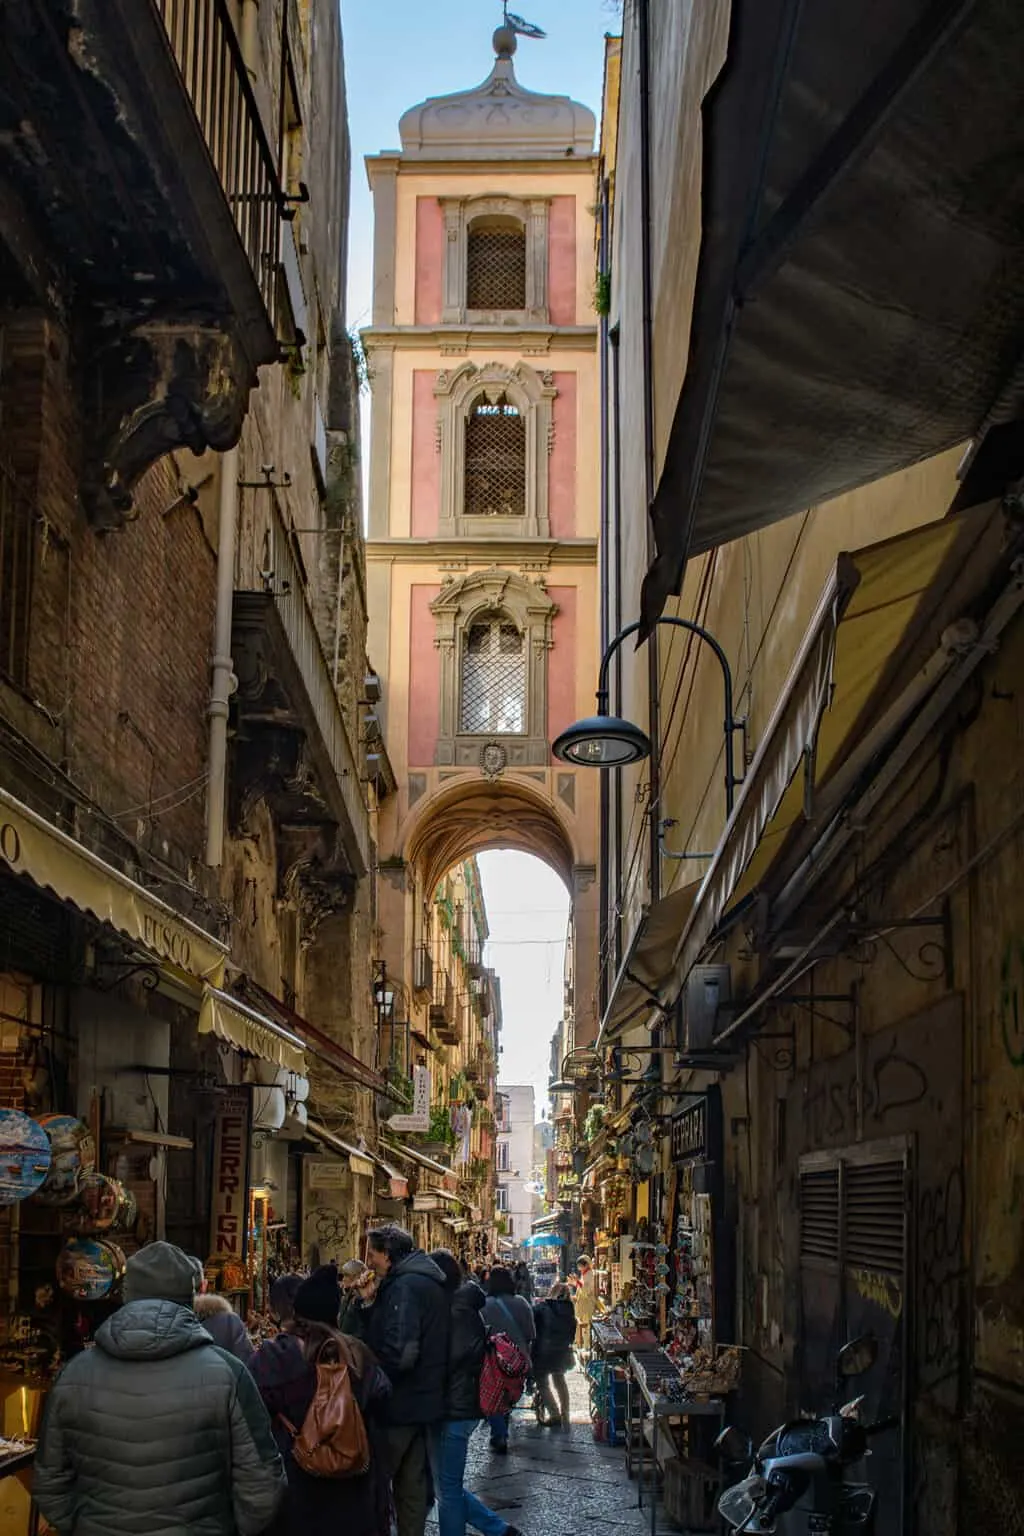 Tourists walk in a dark narrow street with souvenirs in Naples Italy, There is an arched steeple tower at the end of the street.